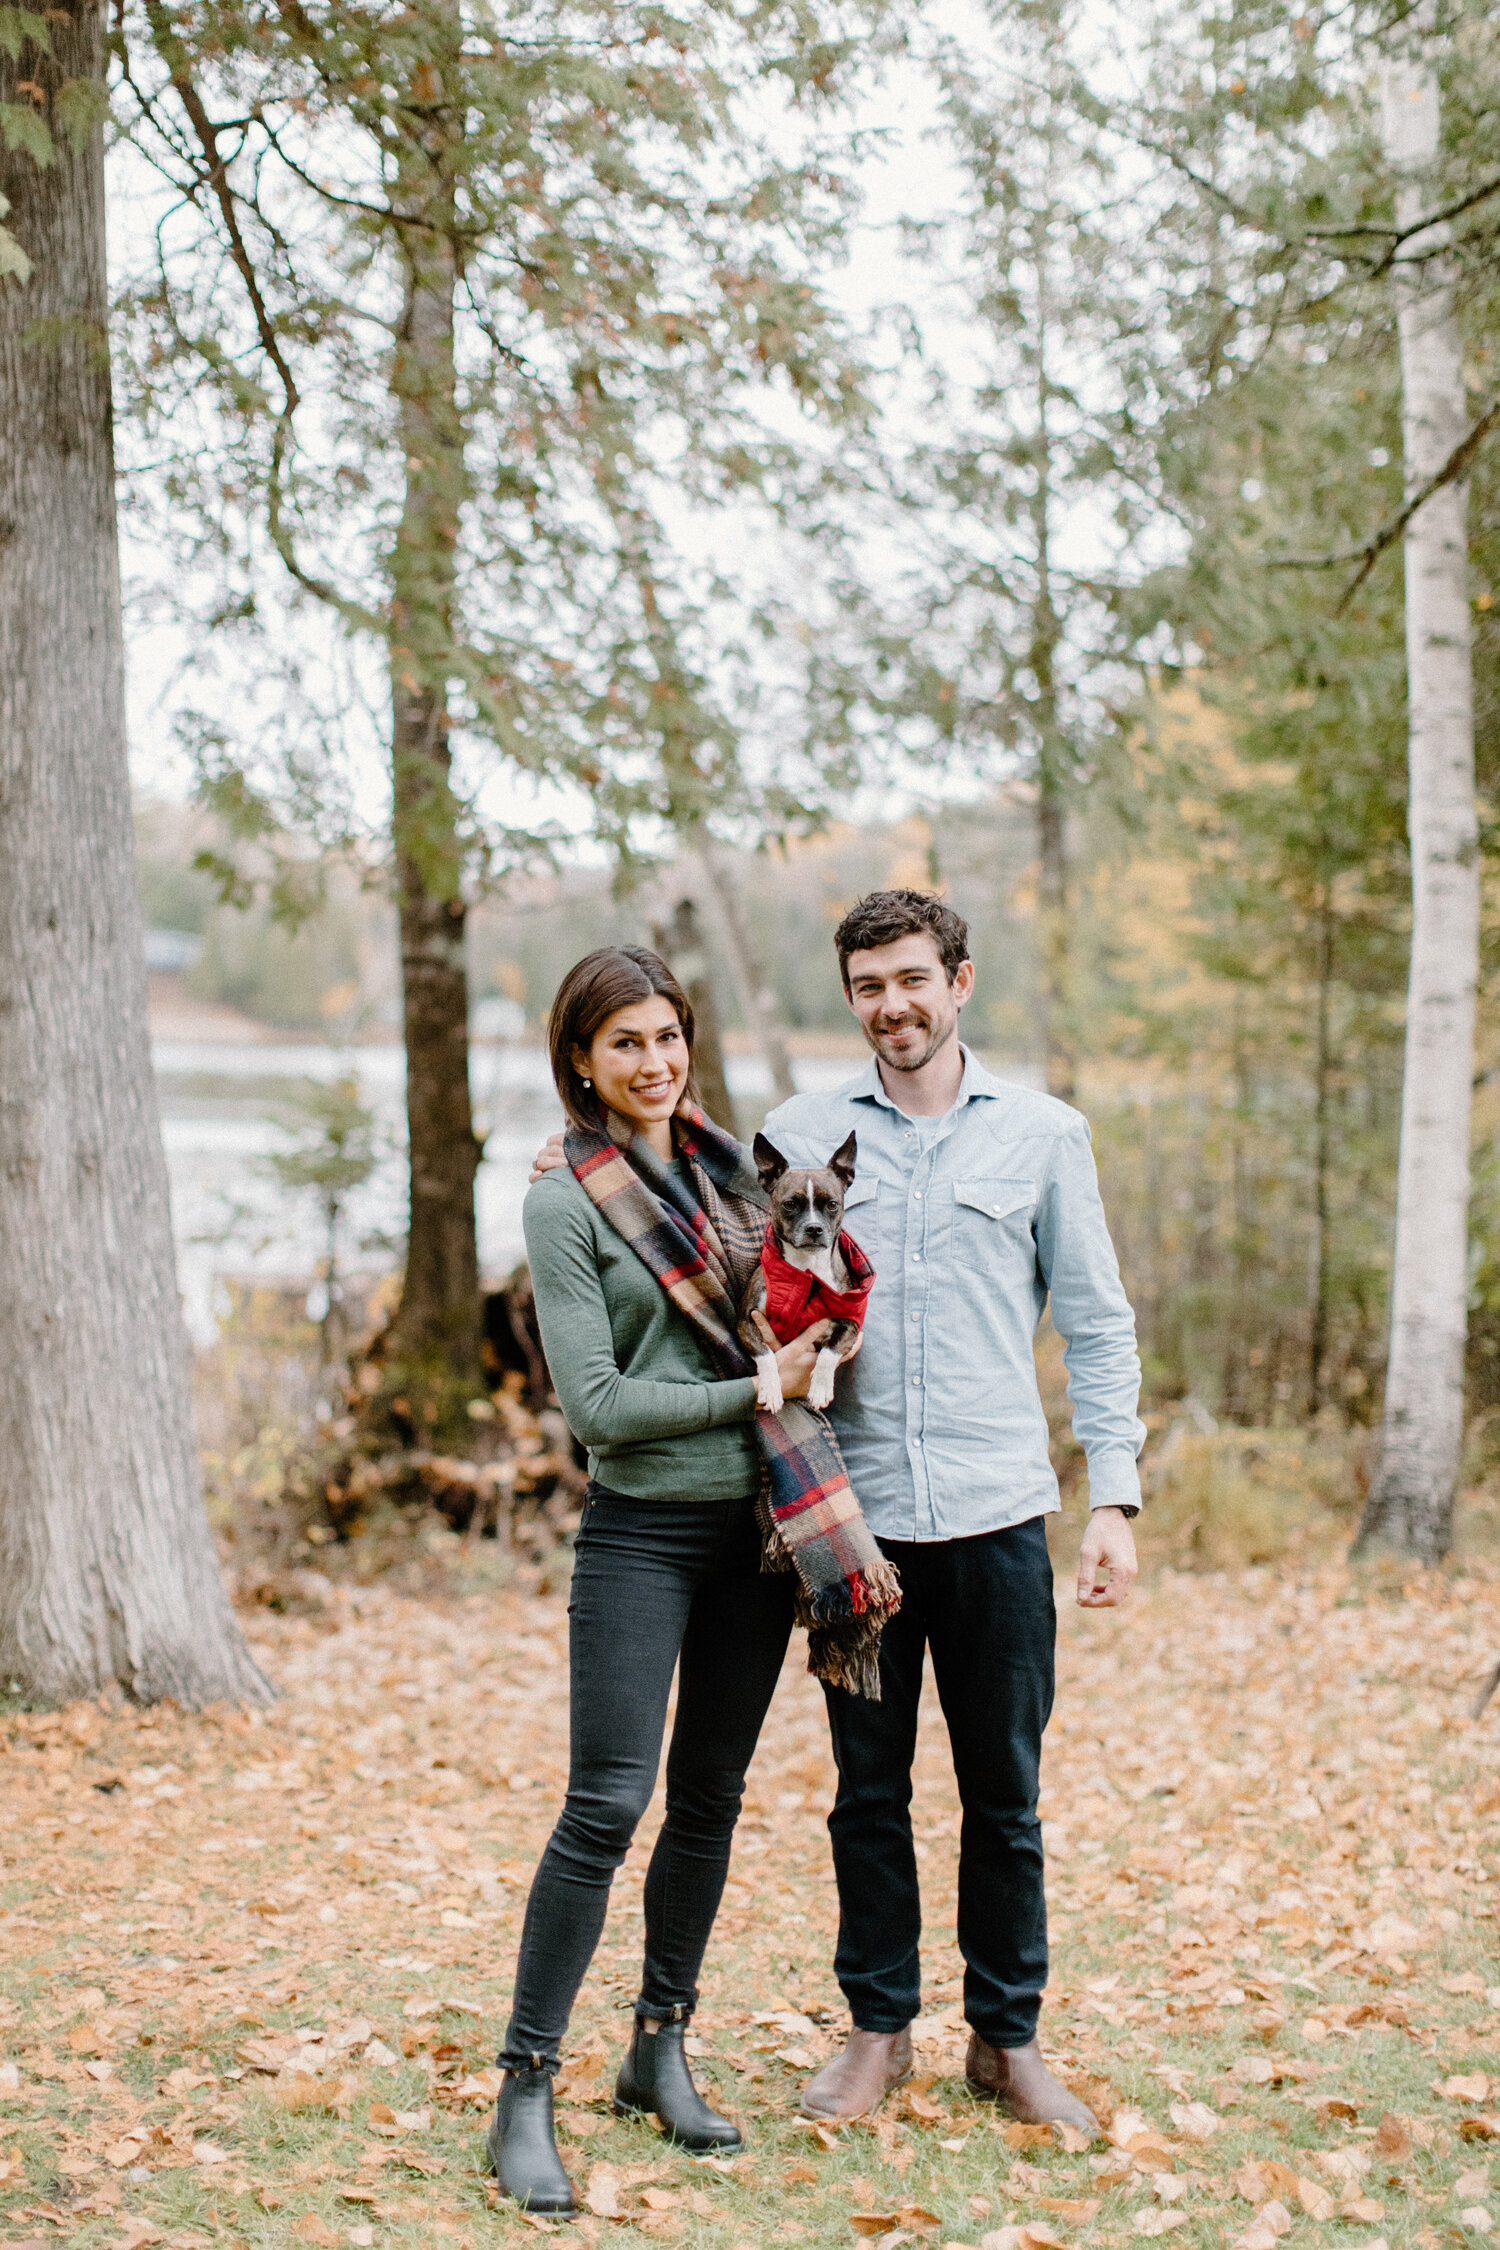  During this wooded Quebec, Canada engagement session, Chelsea Mason Photography captures this couple posing with their french bulldog. Quebec canada engagement photographer, french bulldog engagement session, autumn forrest quebec canada engagement 